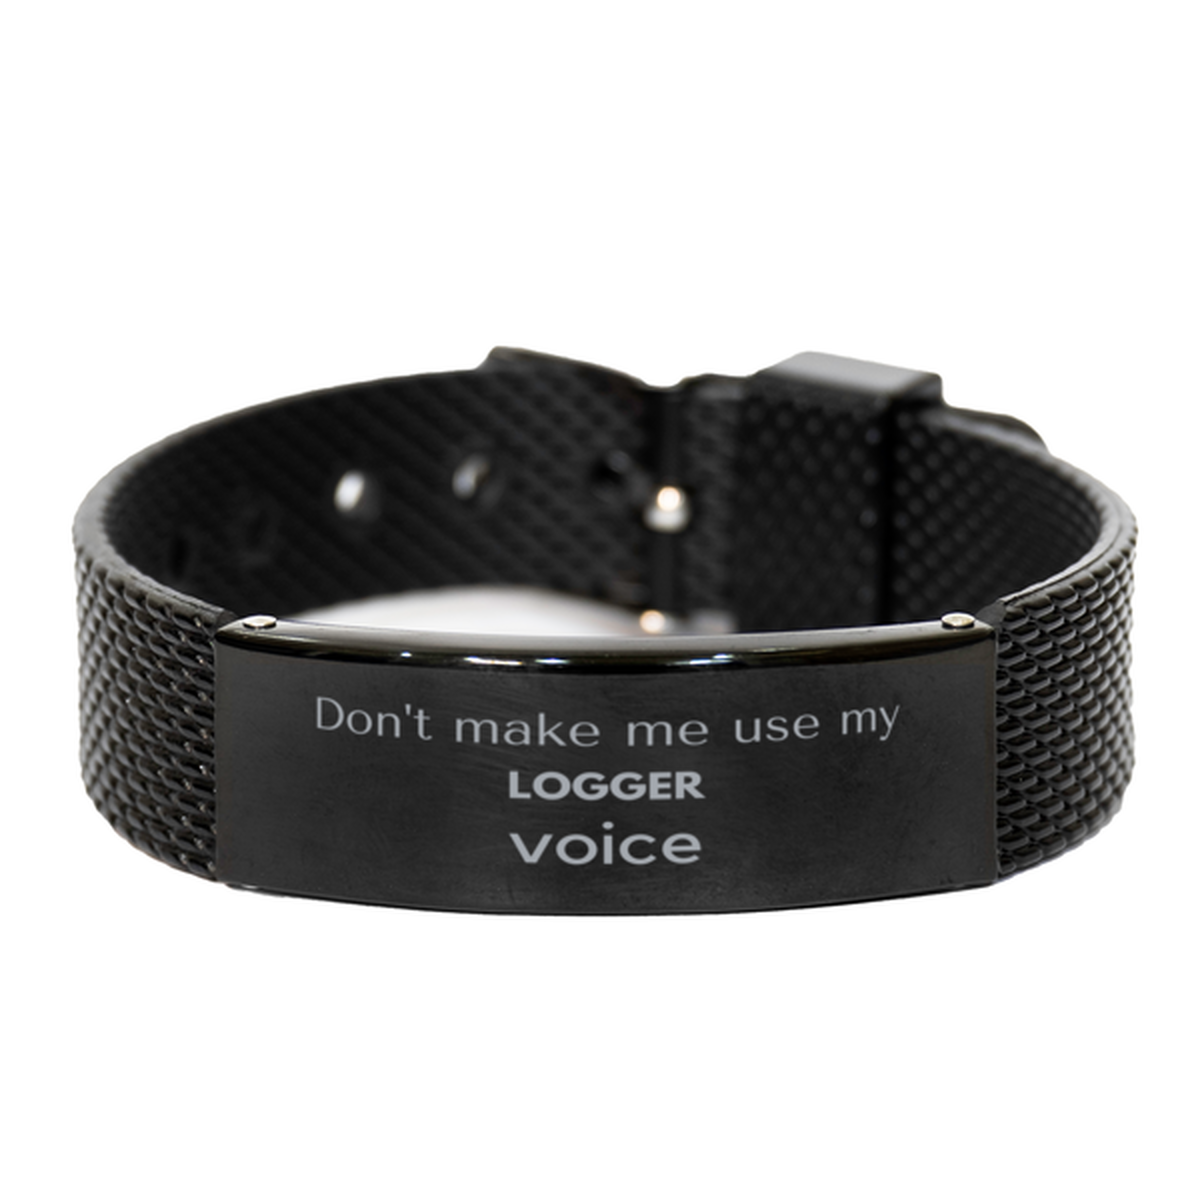 Don't make me use my Logger voice, Sarcasm Logger Gifts, Christmas Logger Black Shark Mesh Bracelet Birthday Unique Gifts For Logger Coworkers, Men, Women, Colleague, Friends